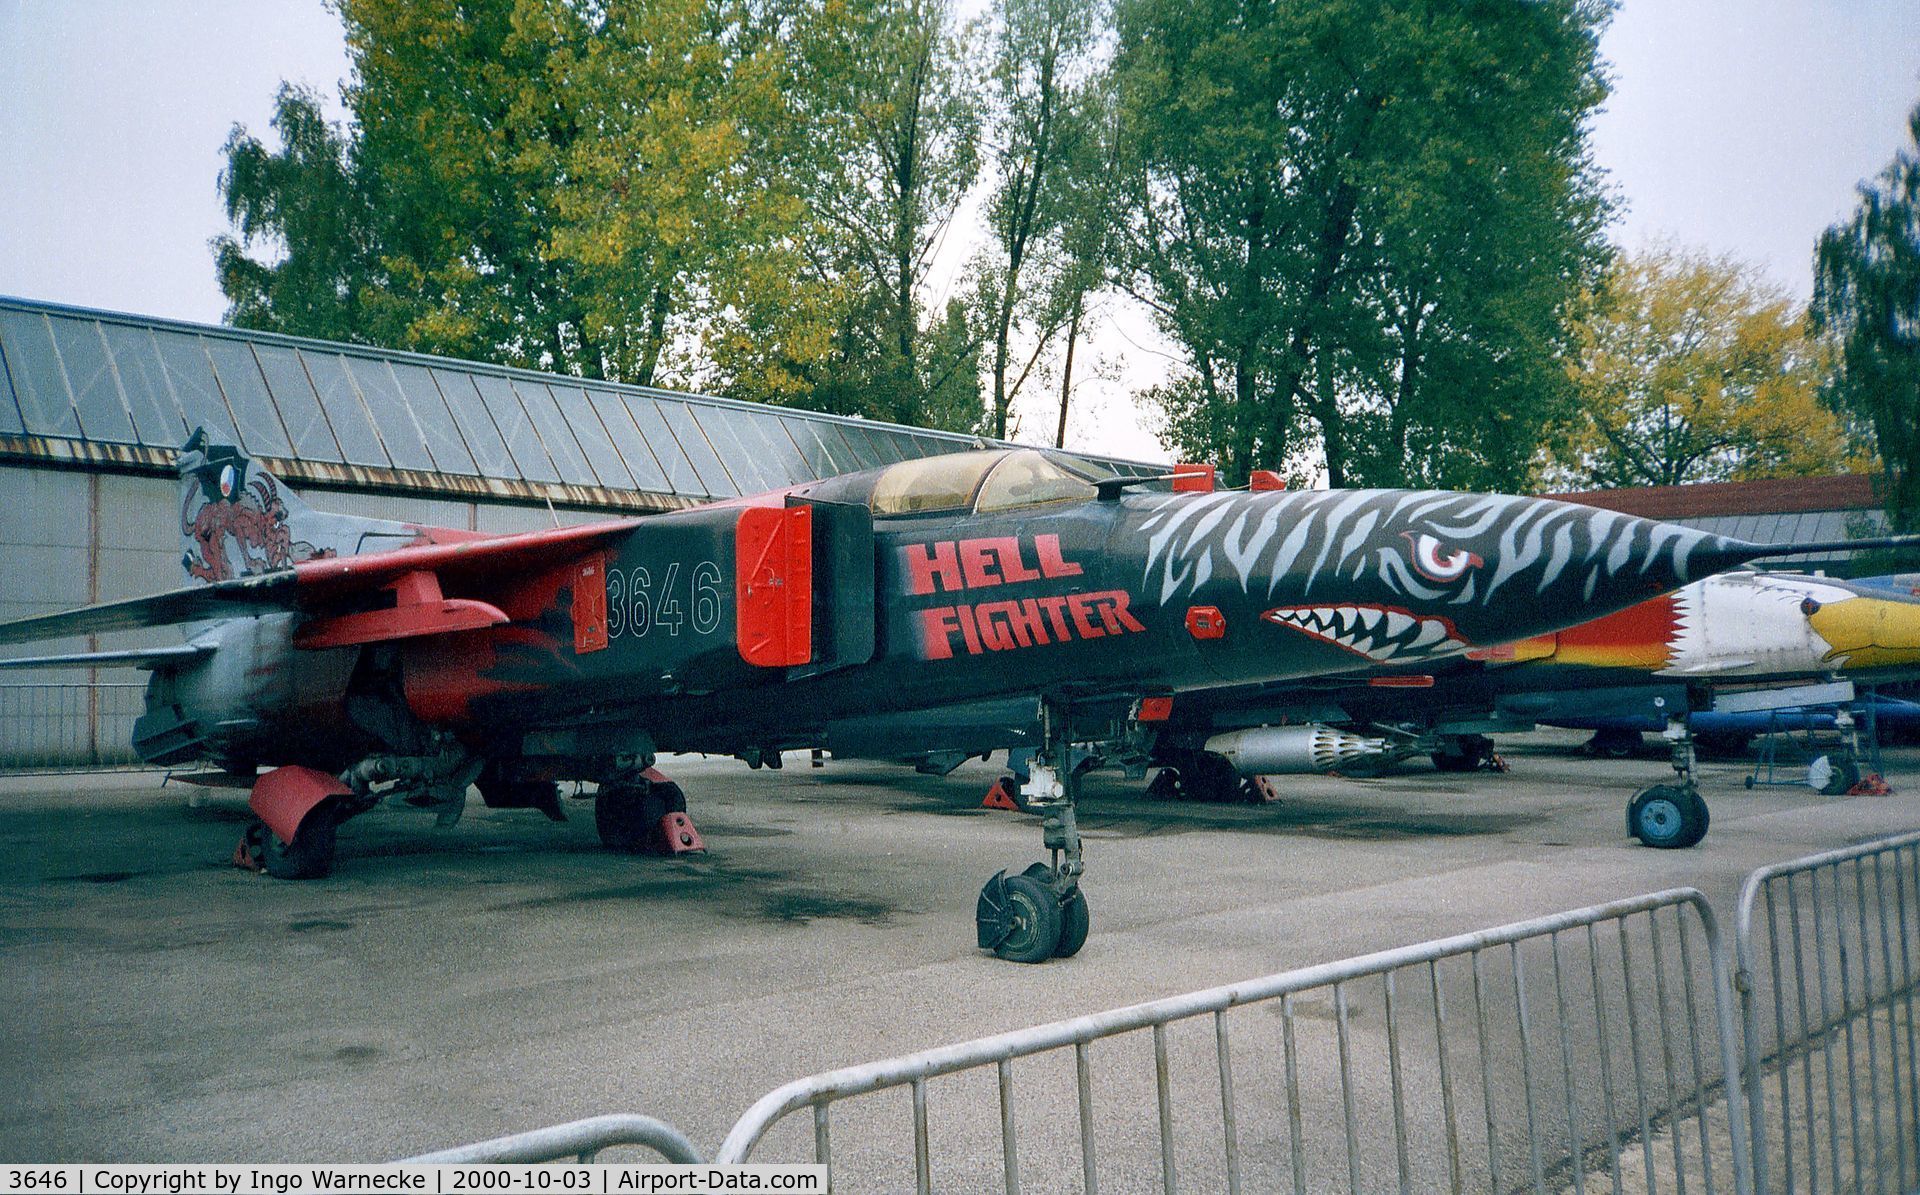 3646, Mikoyan-Gurevich MiG-23MF C/N 0390213646, Mikoyan i Gurevich MiG-23MF FLOGGER-B of the czechoslovak air force at the Letecke Muzeum, Prague-Kbely